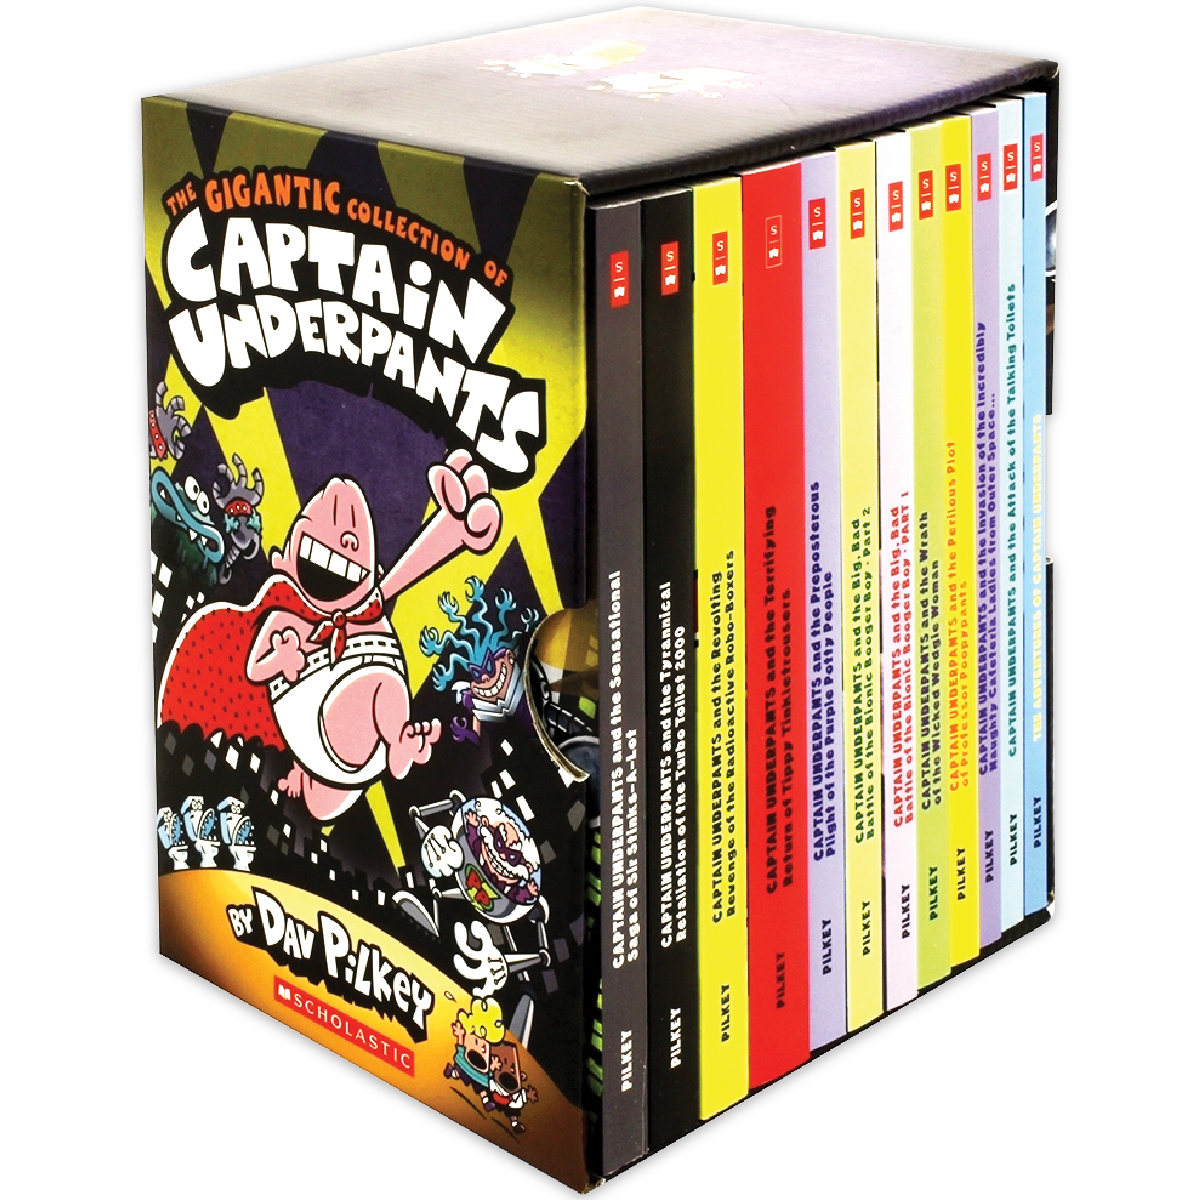 The Gigantic Collection of Captain Underpants Box set (12 books 